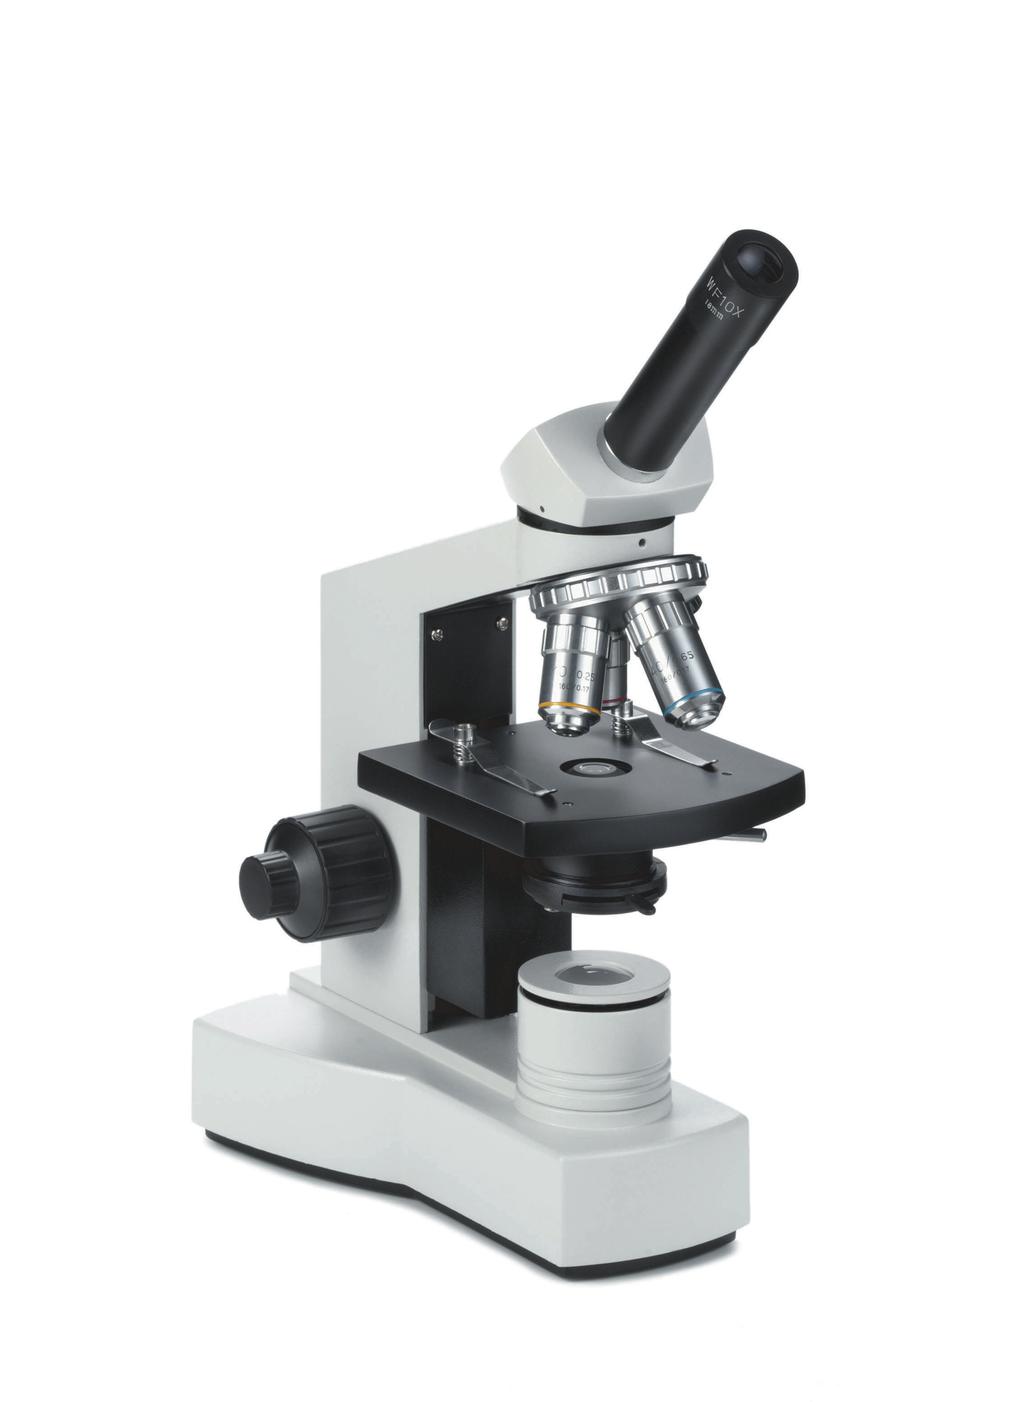 The X-series The Euromex X-series microscopes are perfect for use at schools and in laboratories. The nice, ergonomically designed stand is very comfortable in use.